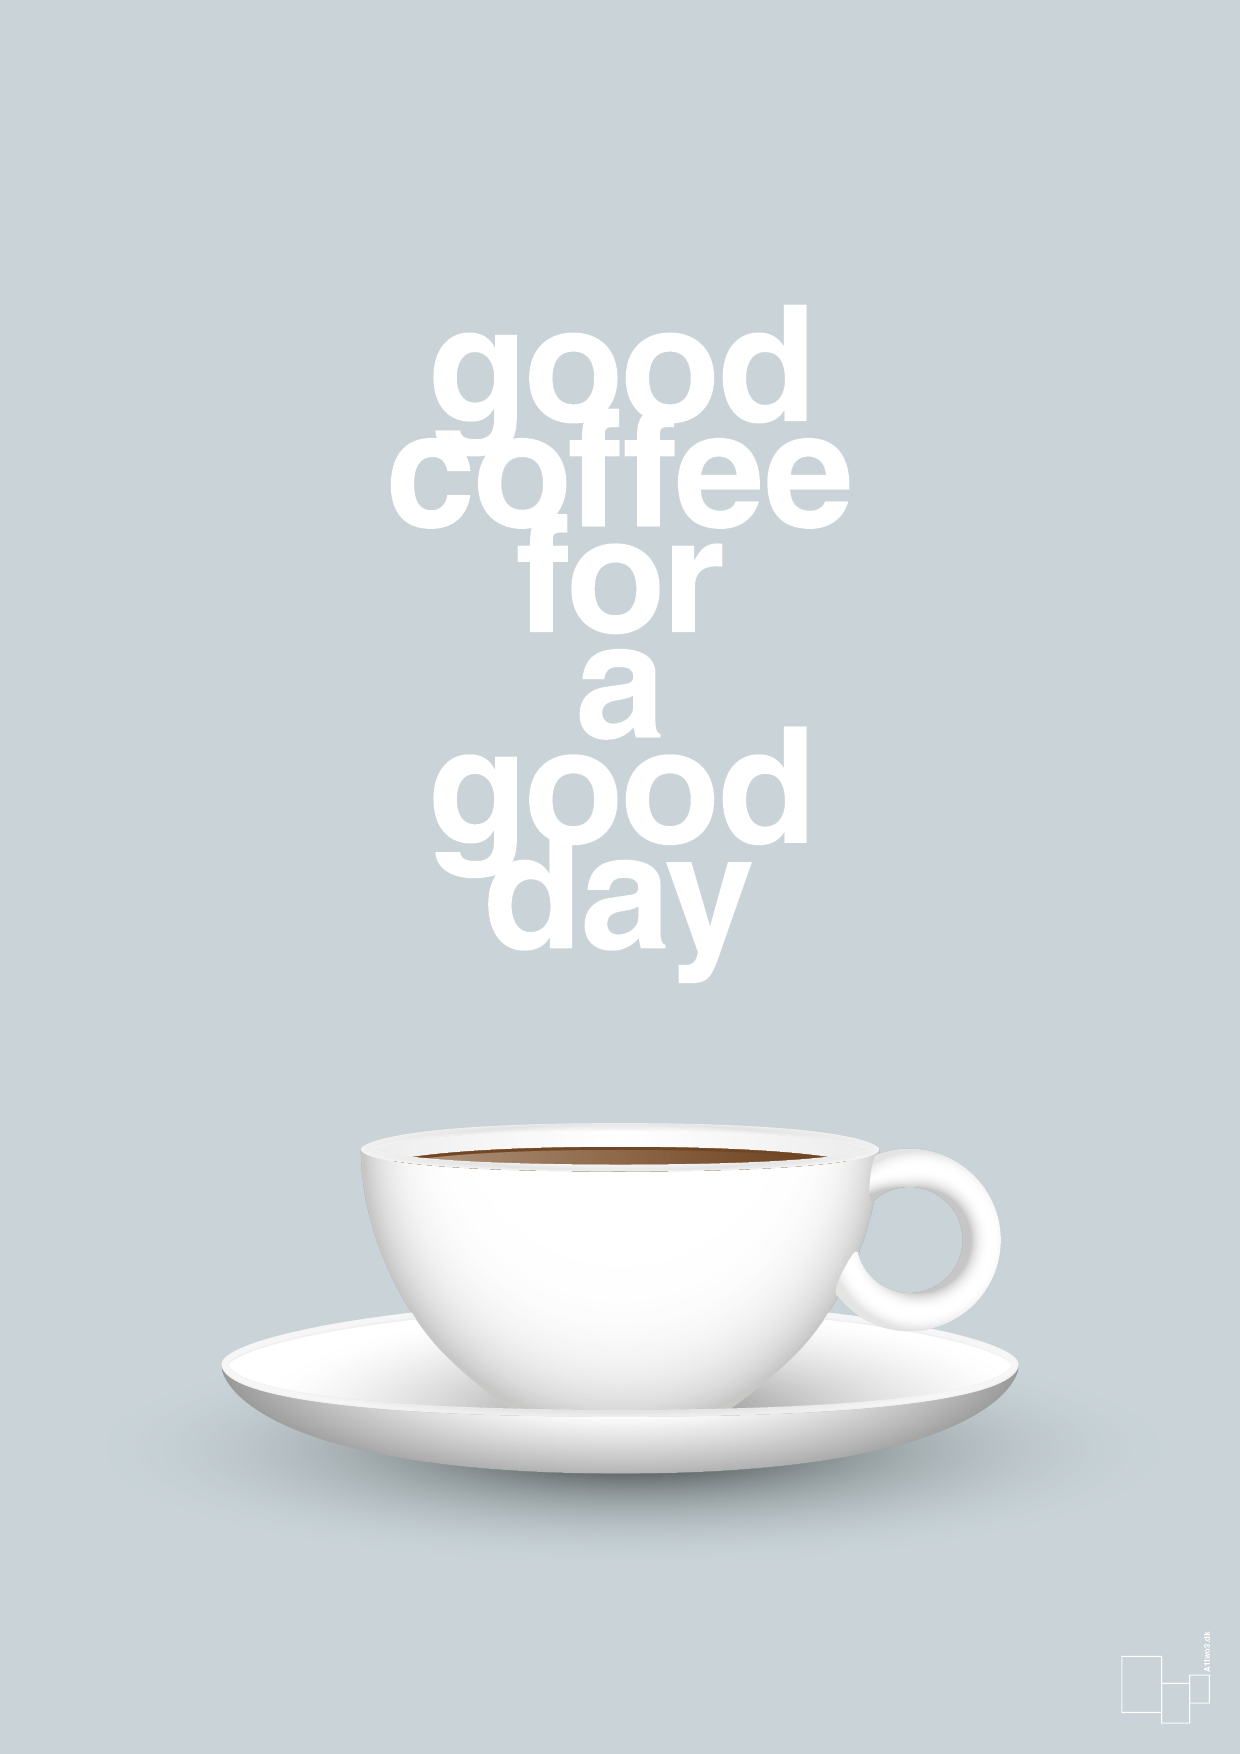 good coffee for a good day - Plakat med Mad & Drikke i Light Drizzle